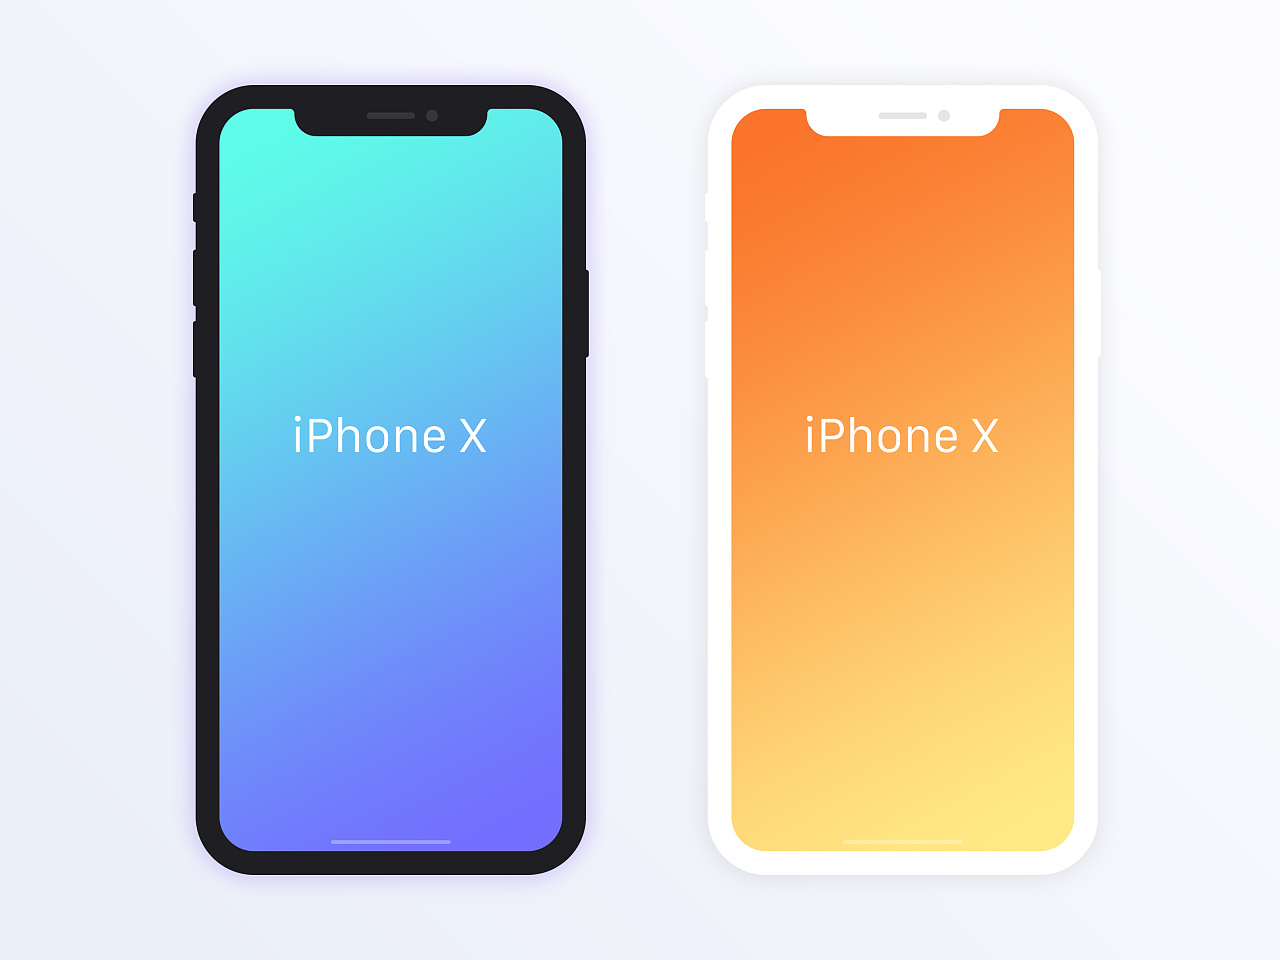 iPhone X: Specs, features, pre-order, and release date | Macworld